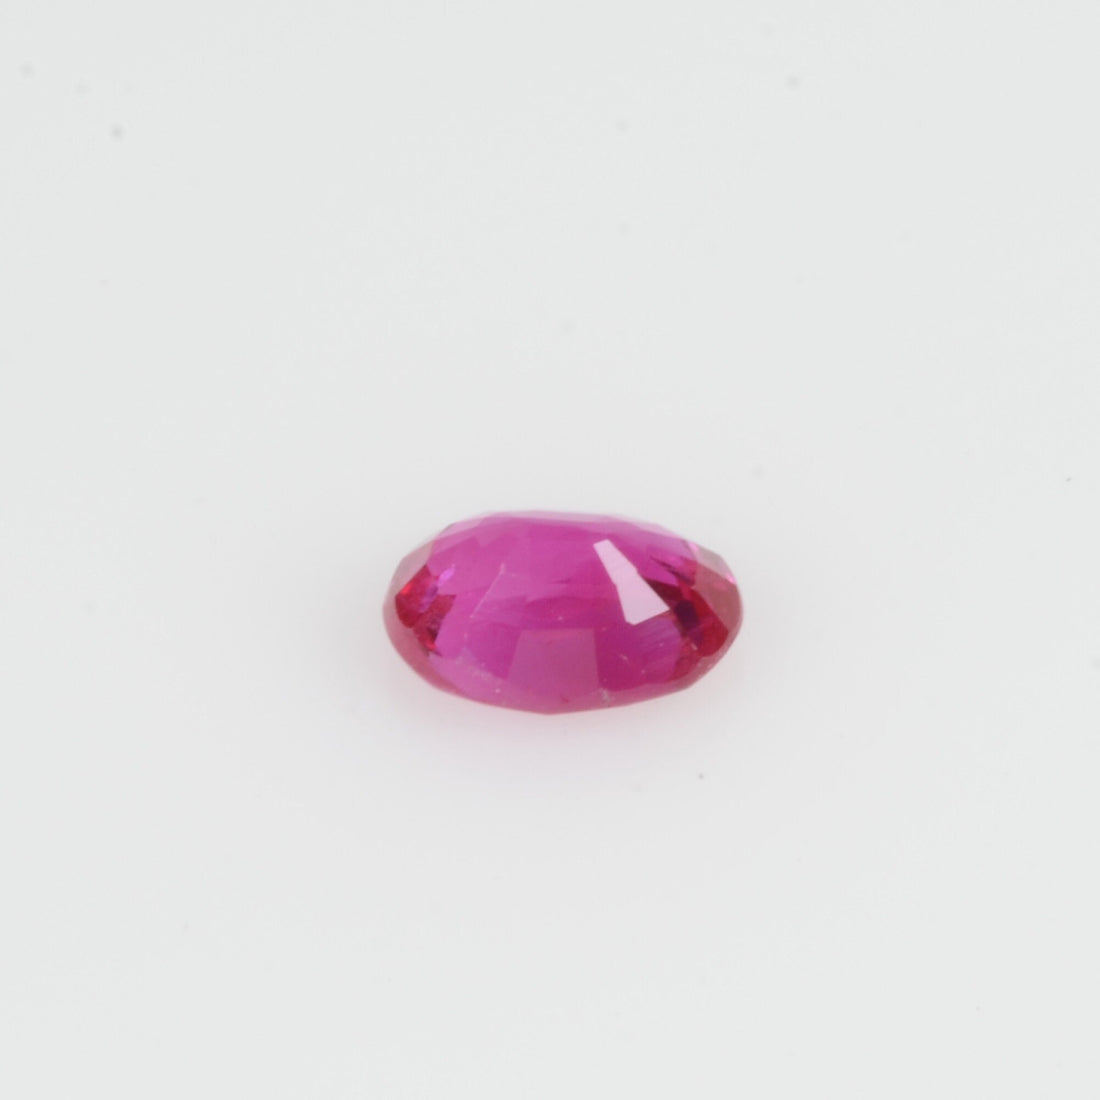 0.22 Cts Natural Ruby Loose Gemstone Oval Cut